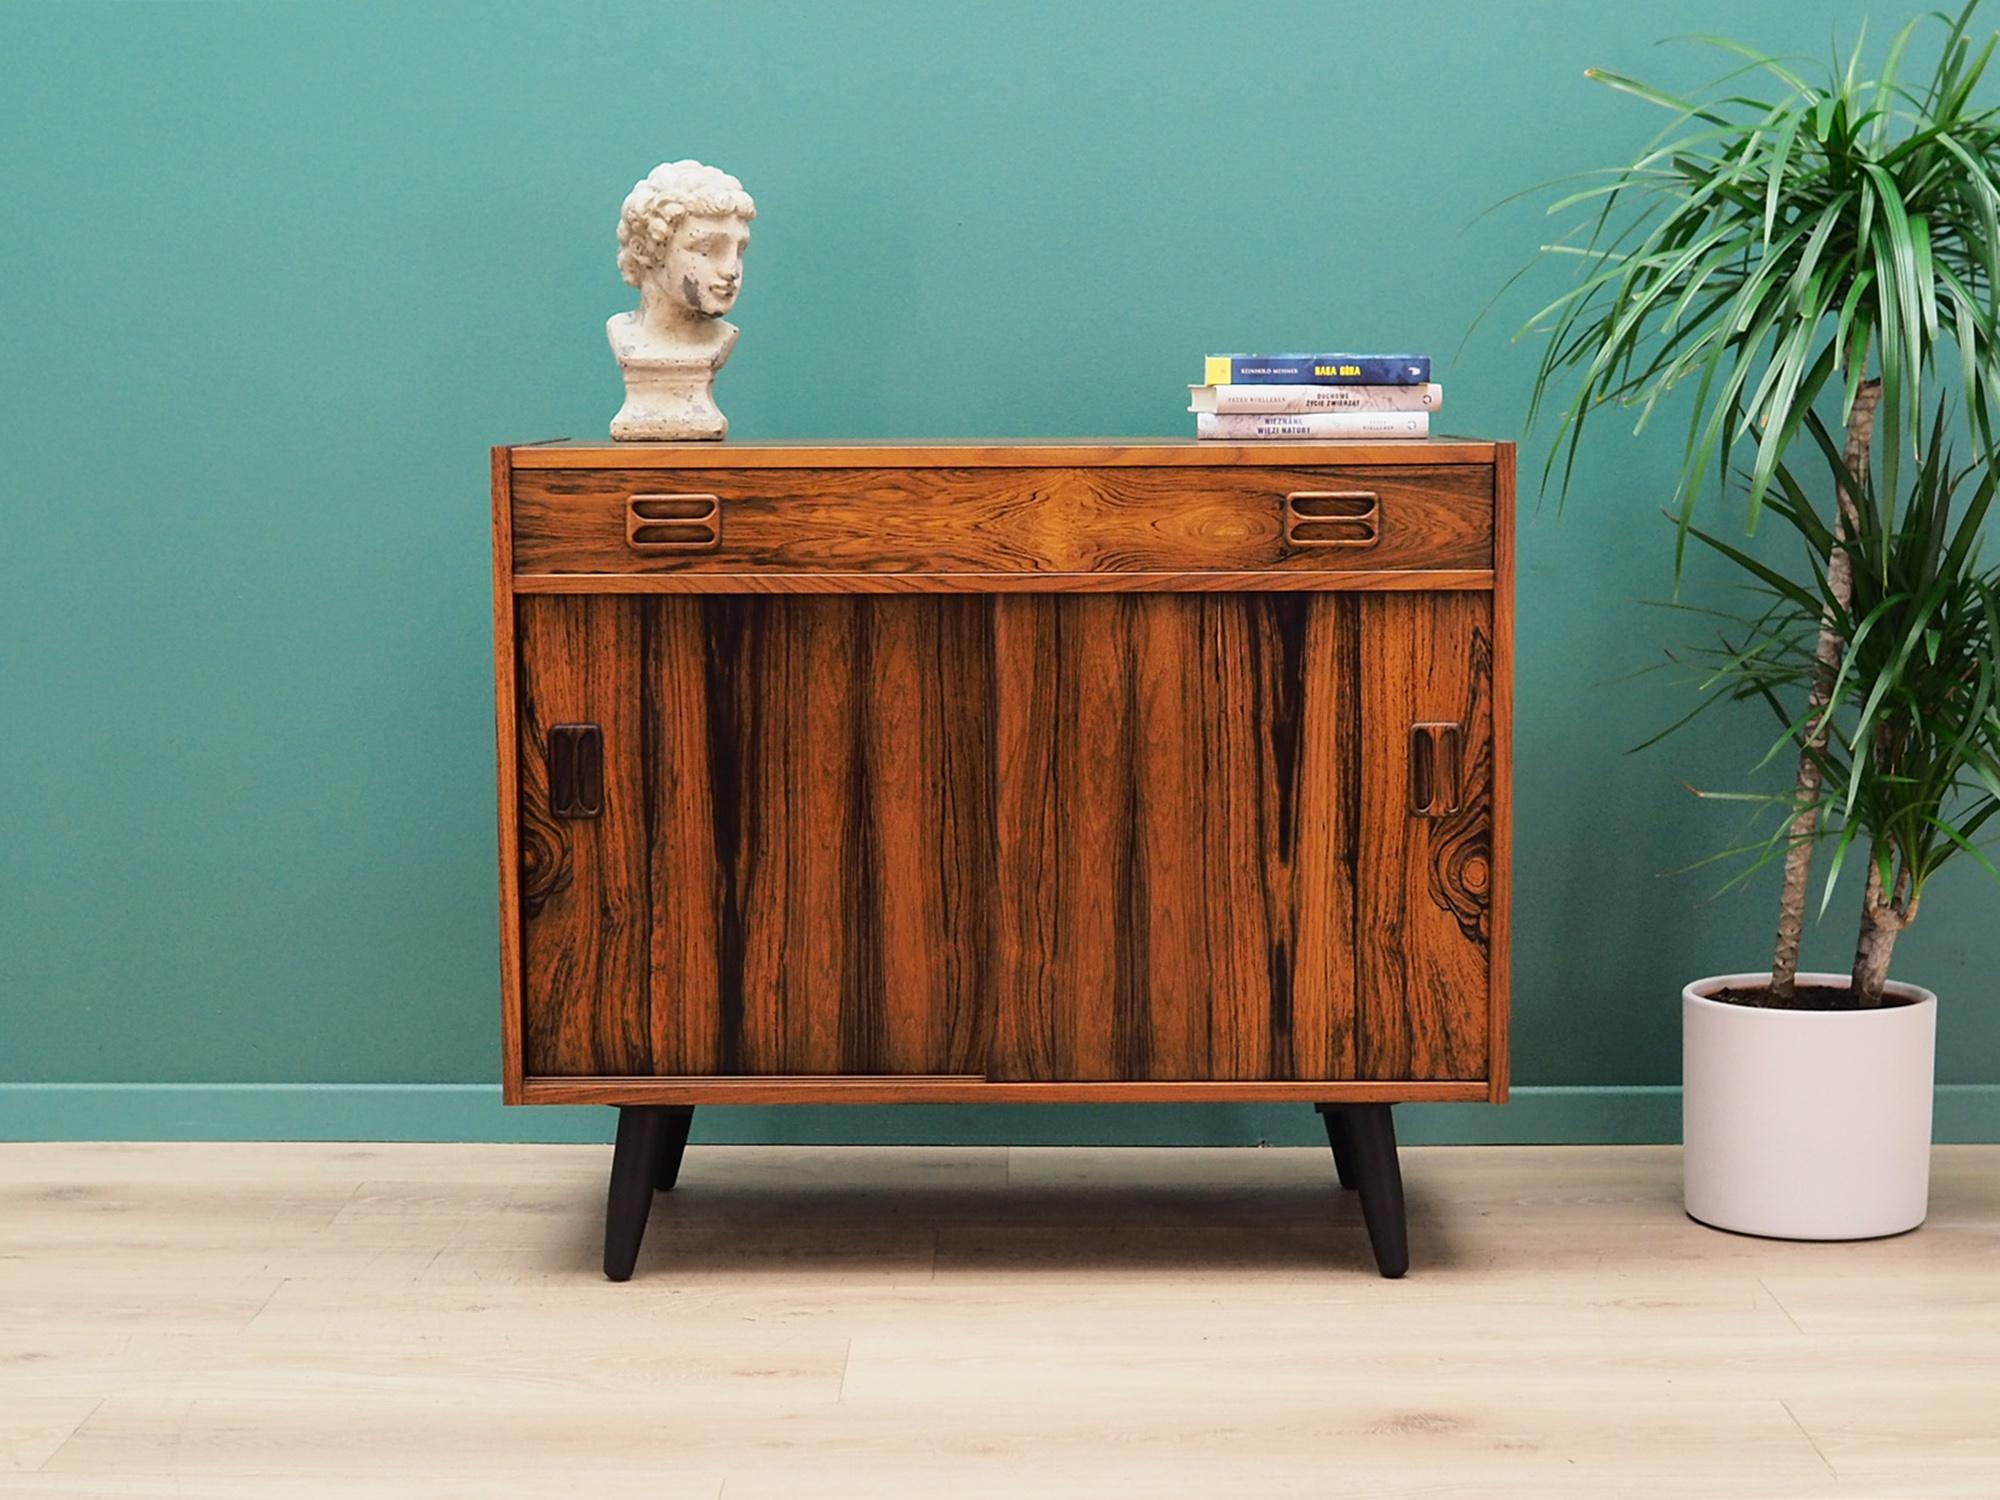 Cabinet was made in the 1970s, designed by well-known Danish designer Niels J. Thørso.

The structure is covered with rosewood veneer. The legs are made of solid wood stained black. Surface after refreshing. Inside the space has been filled with a